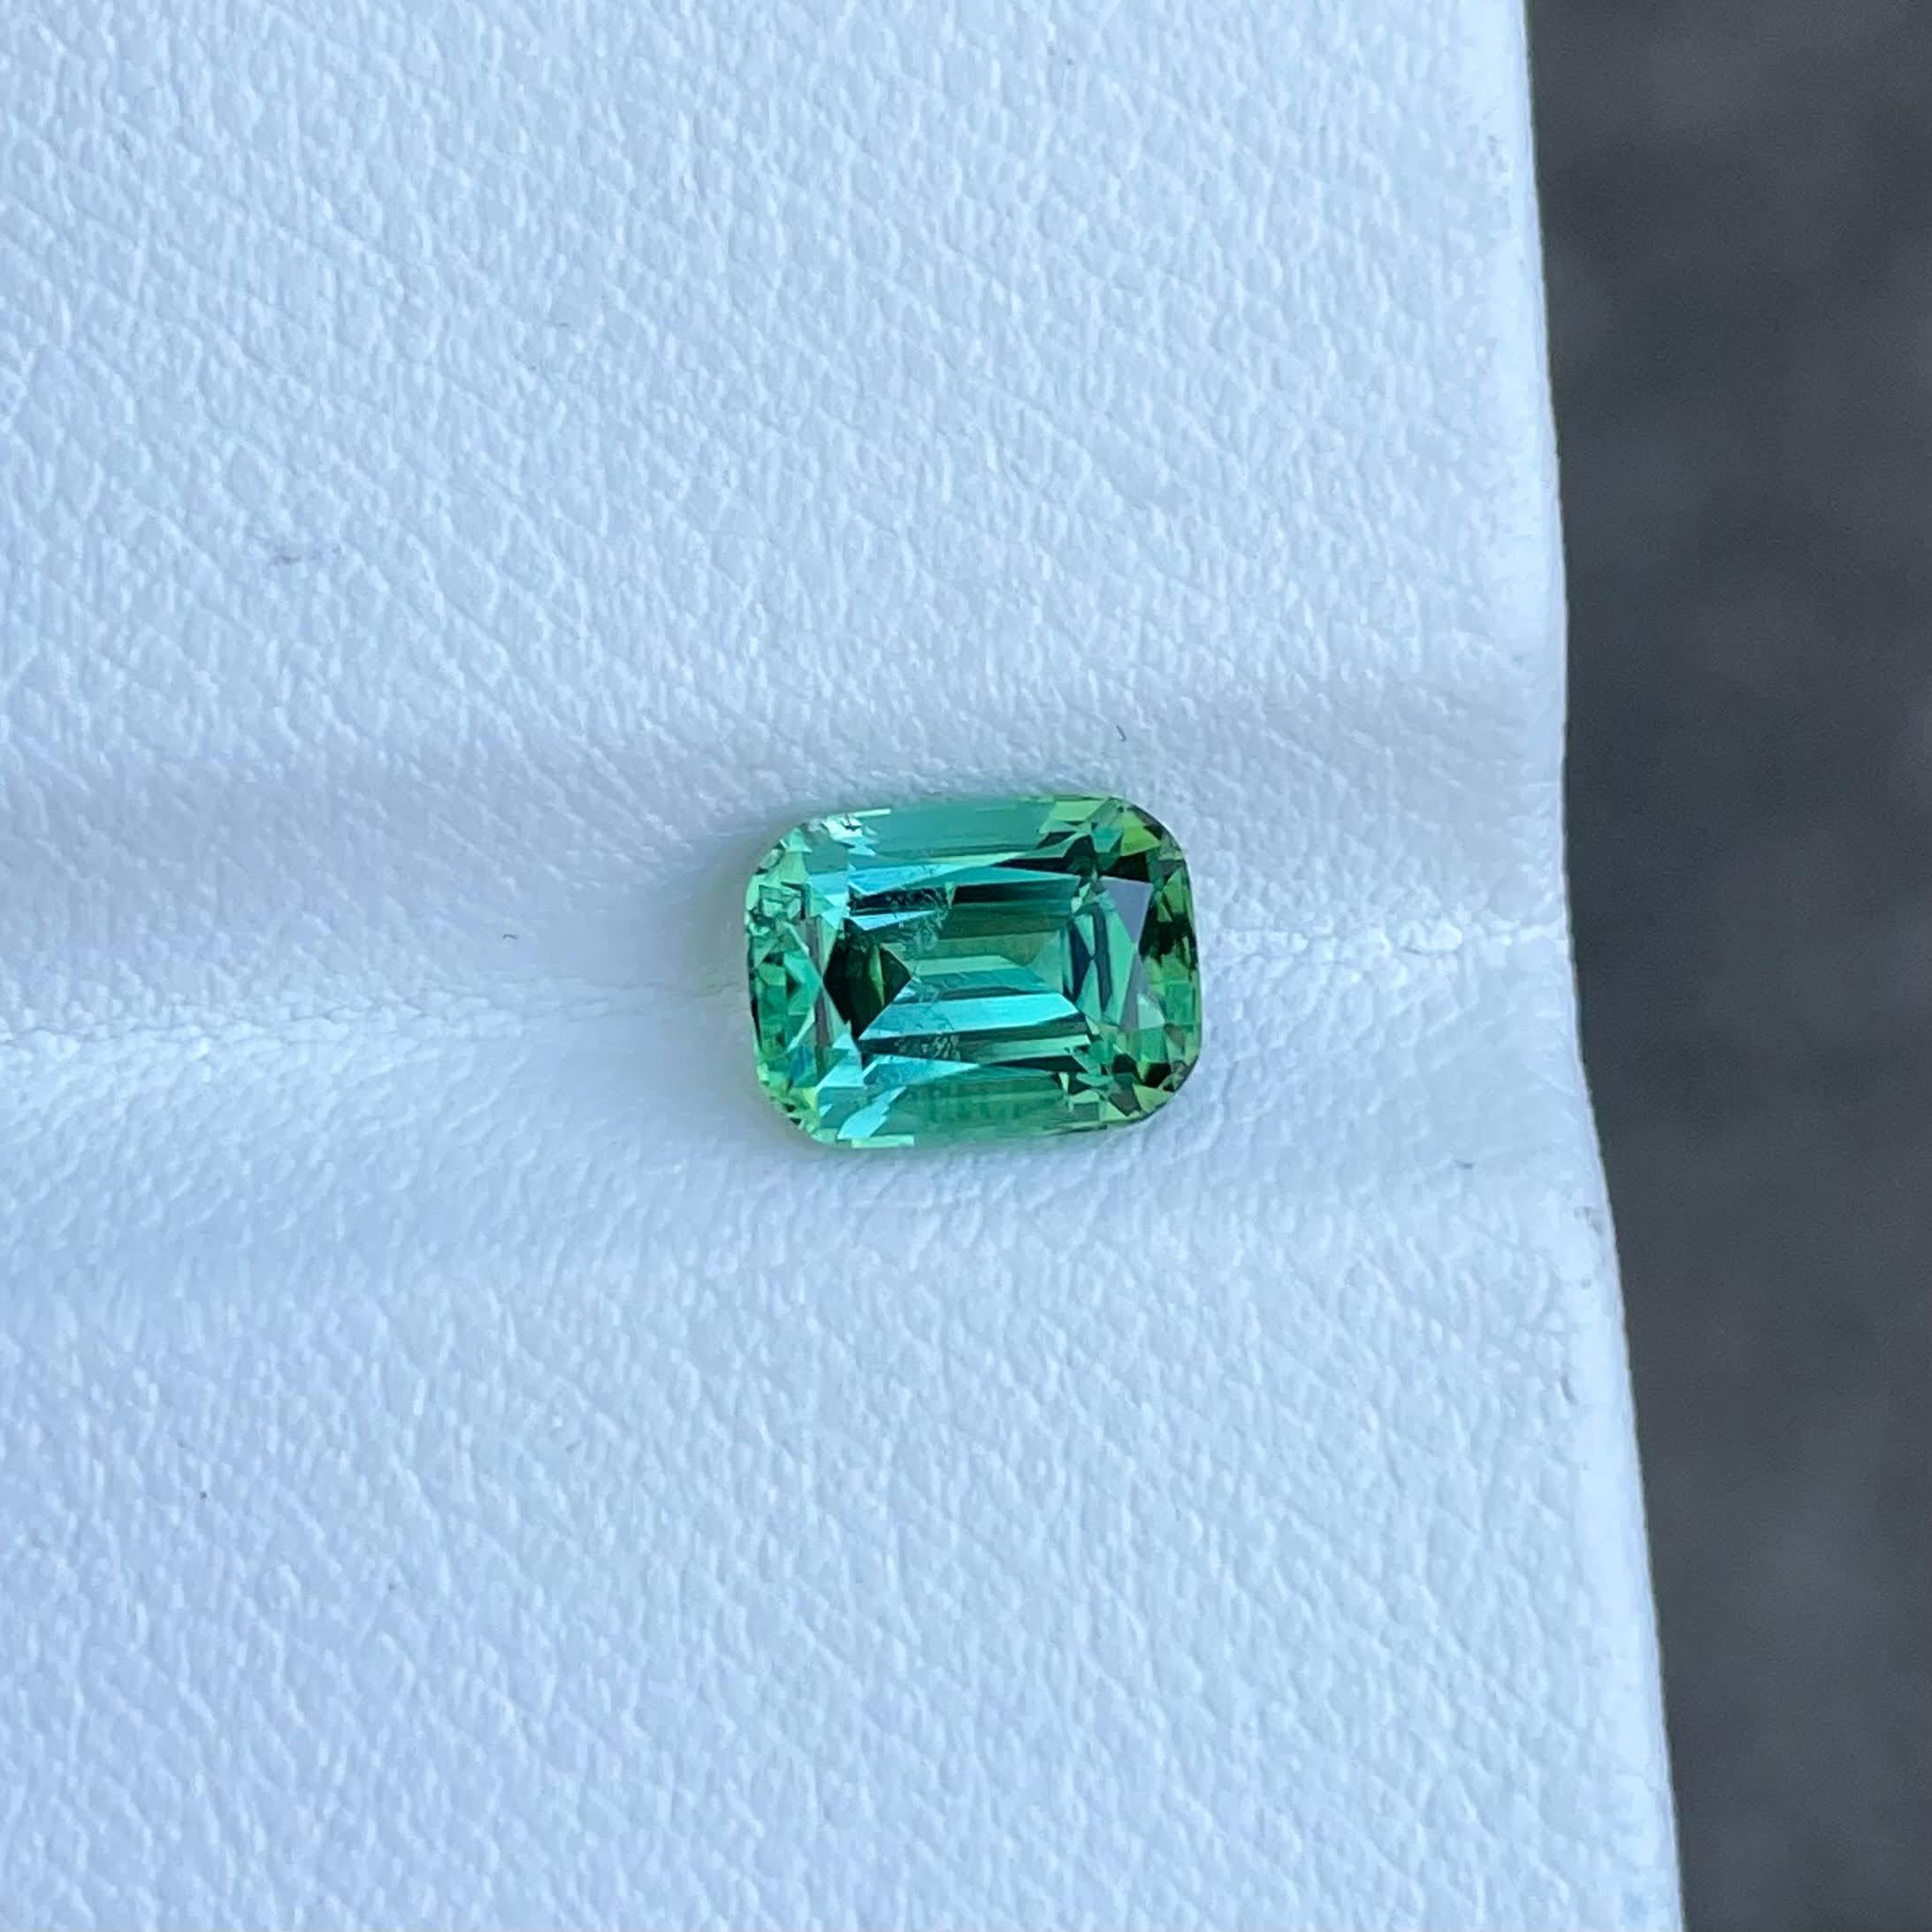 Weight 1.85 carats 
Dimensions 7.9x6.0x5.0 mm
Treatment none 
Origin Afghanistan 
Clarity VVS
Shape cushion 
Cut fancy cushion 





Behold the exquisite allure of a 1.85-carat Mint Green Tourmaline, skillfully fashioned into a Fancy Cushion Cut,